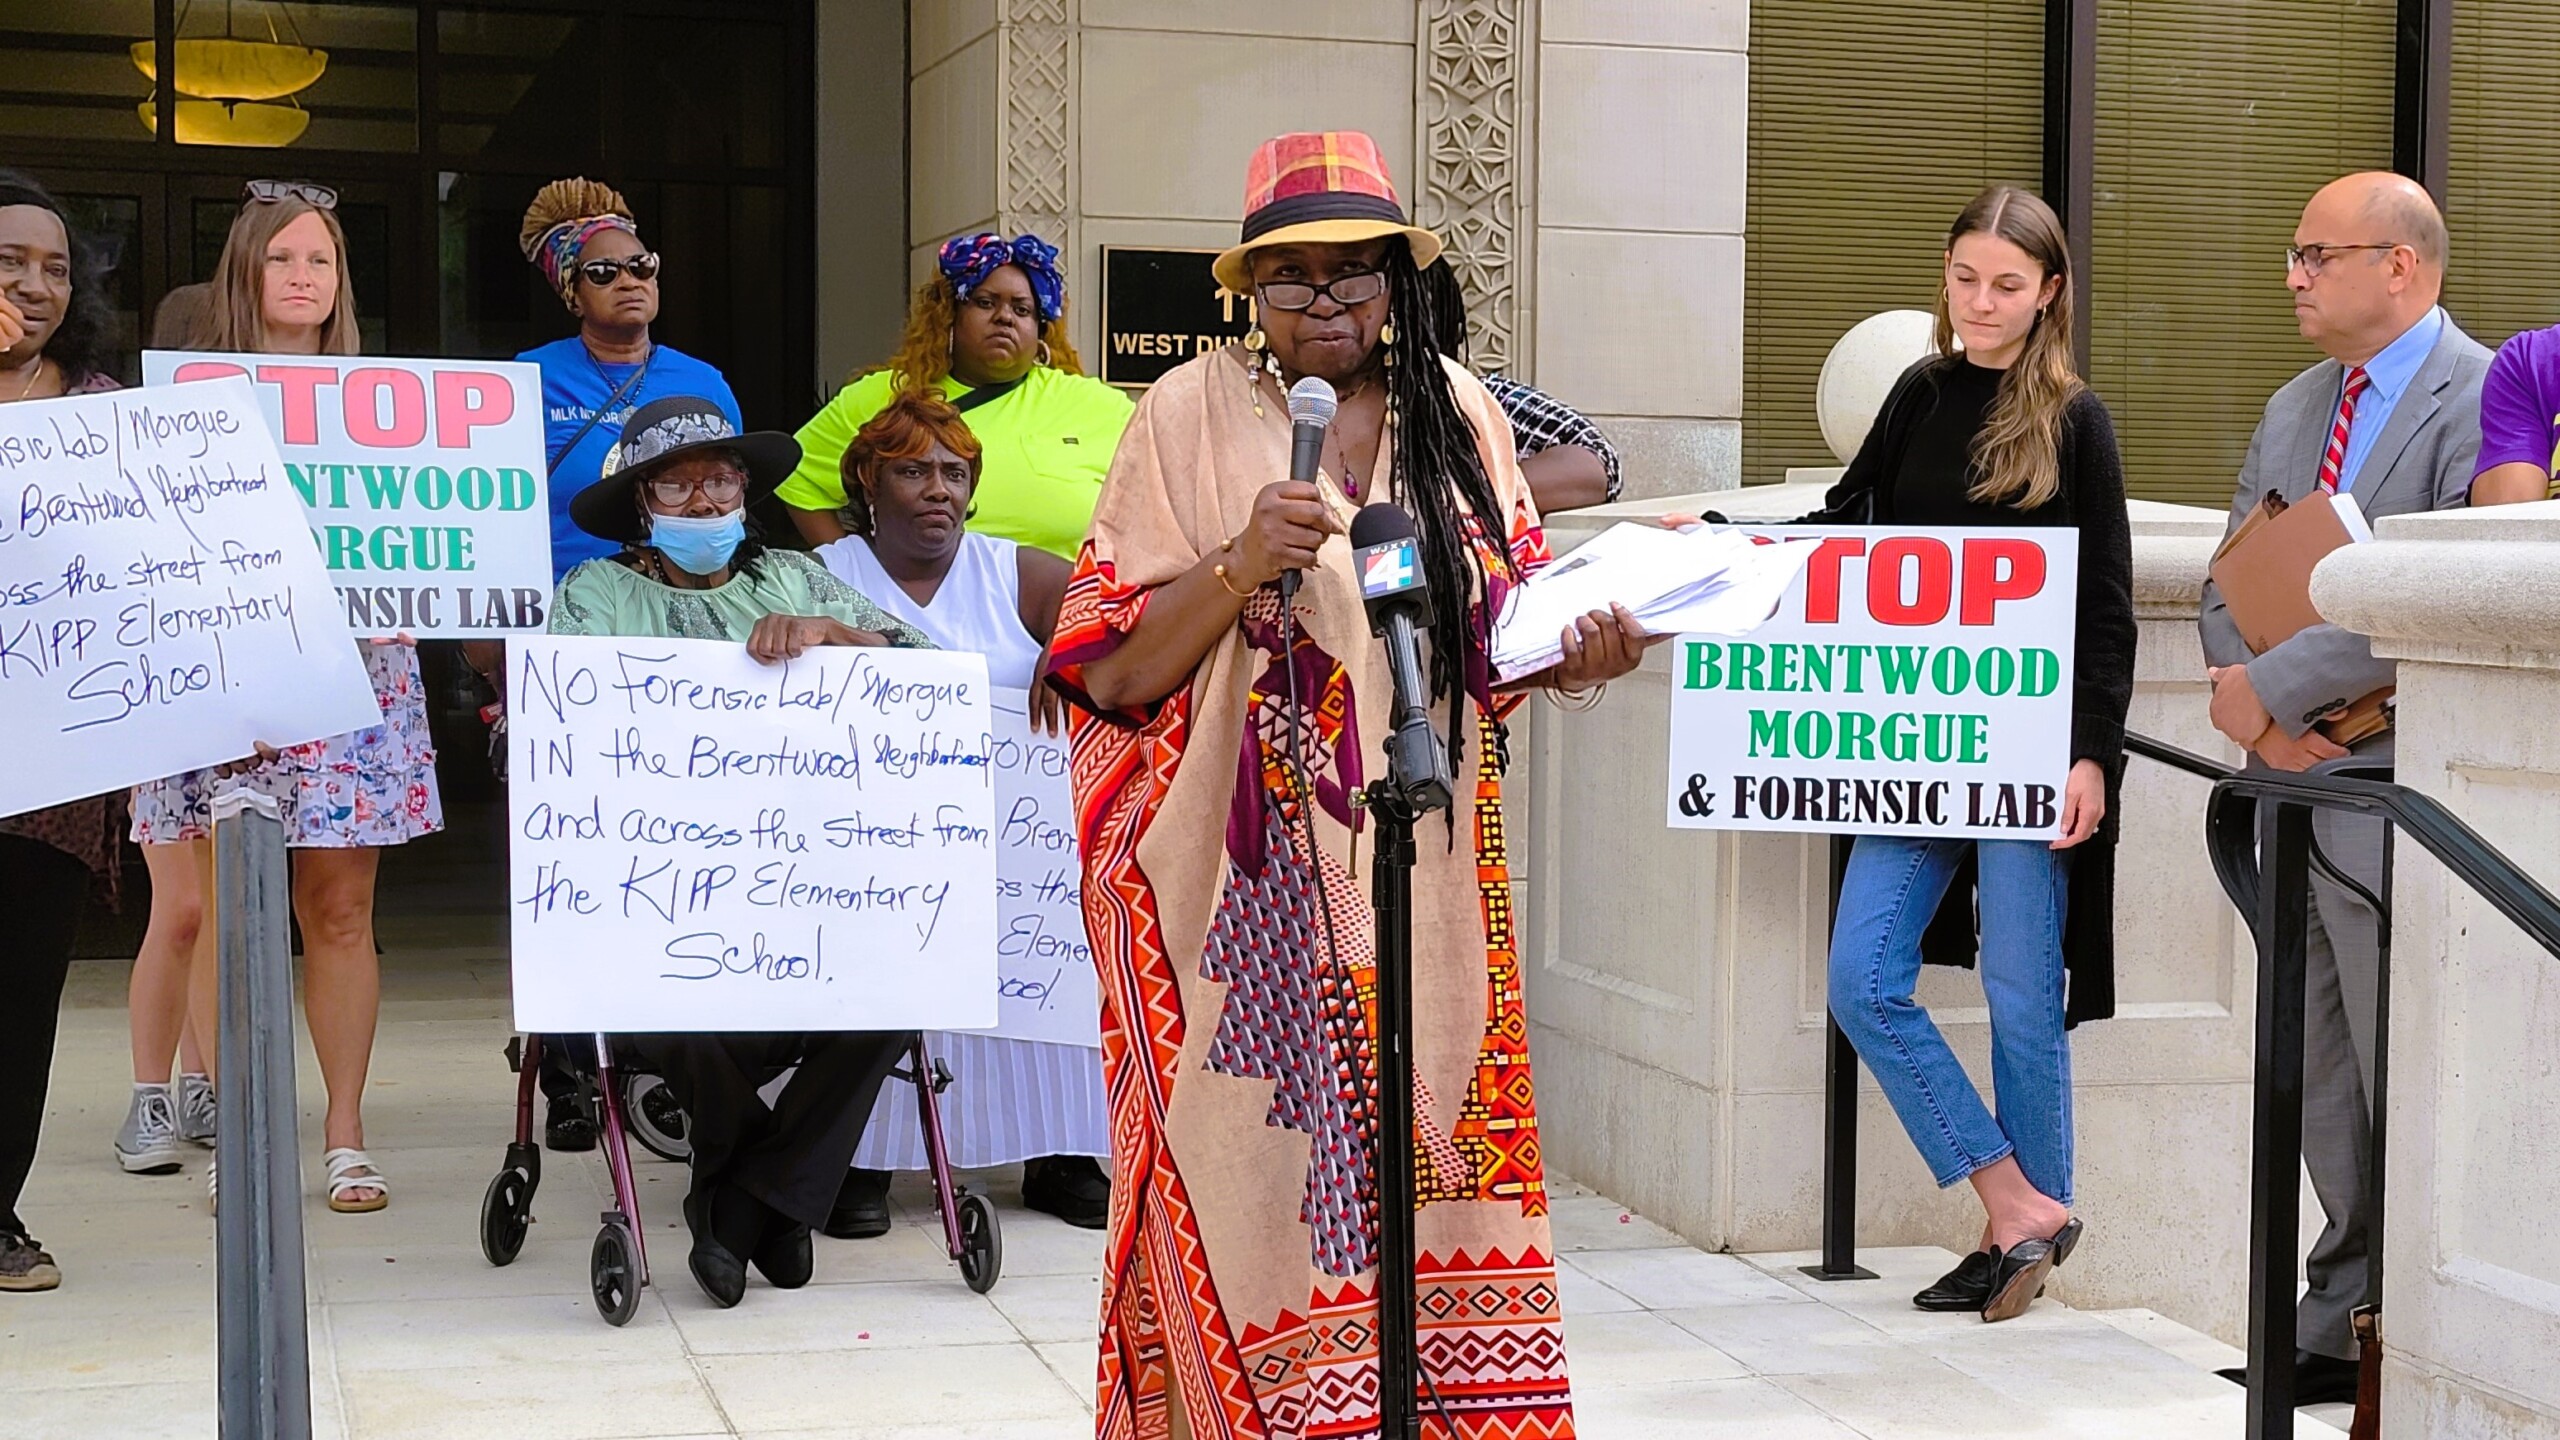 Metro Gardens Neighborhood Association President Lydia Bell announces a lawsuit against the city to stop construction of a new medical examiner's office in Brentwood. | Dan Scanlan, Jacksonville Today